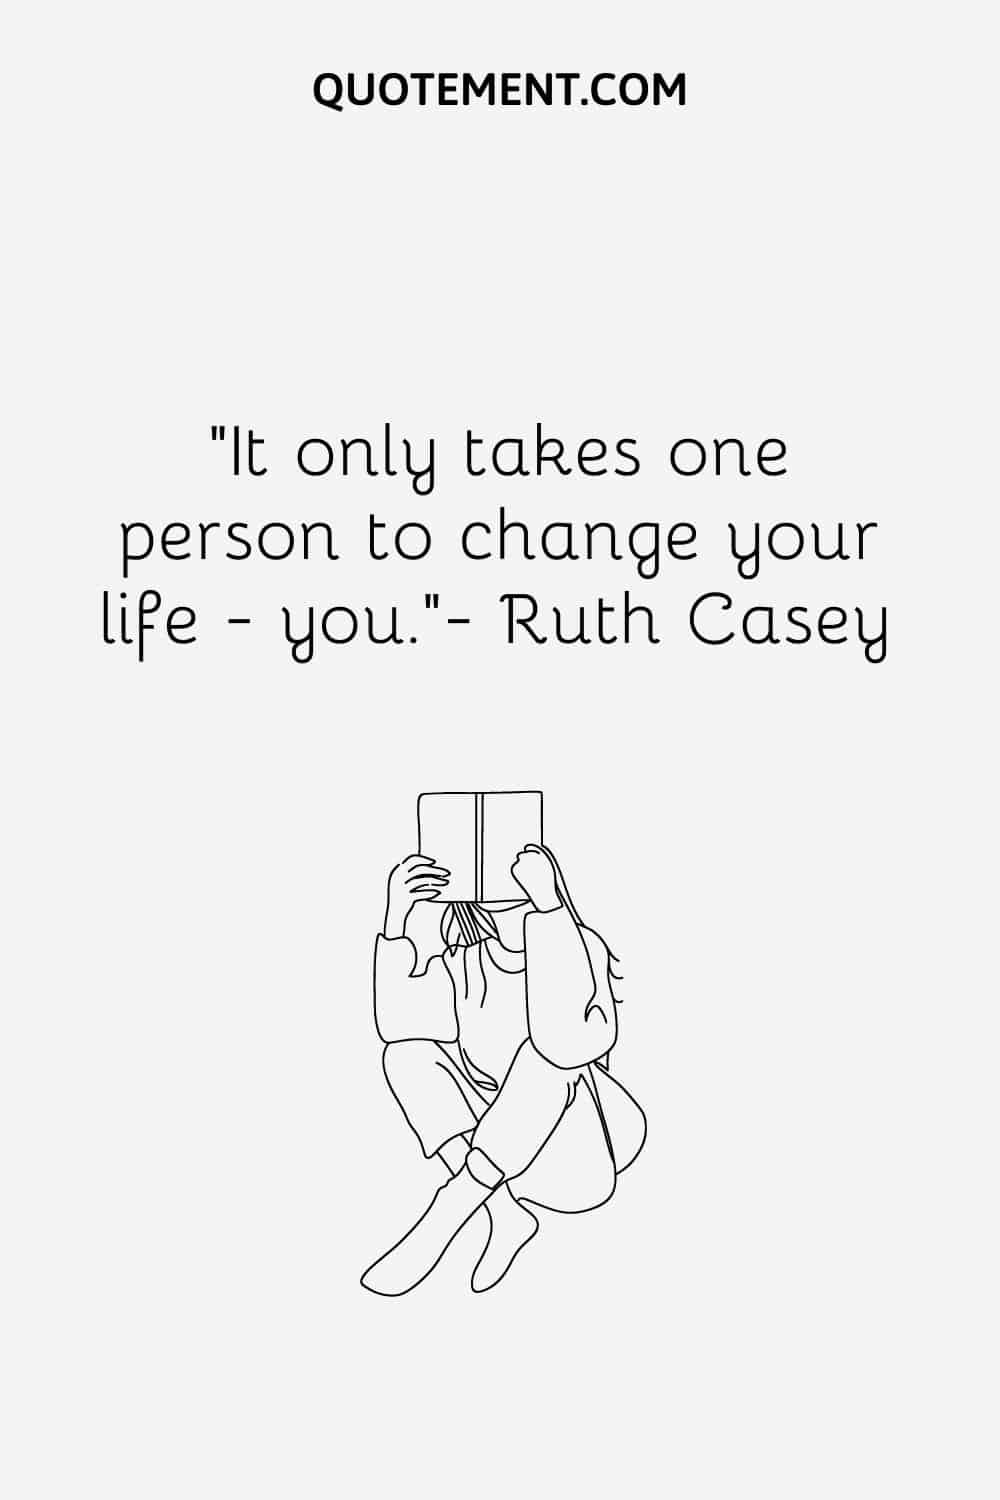 It only takes one person to change your life